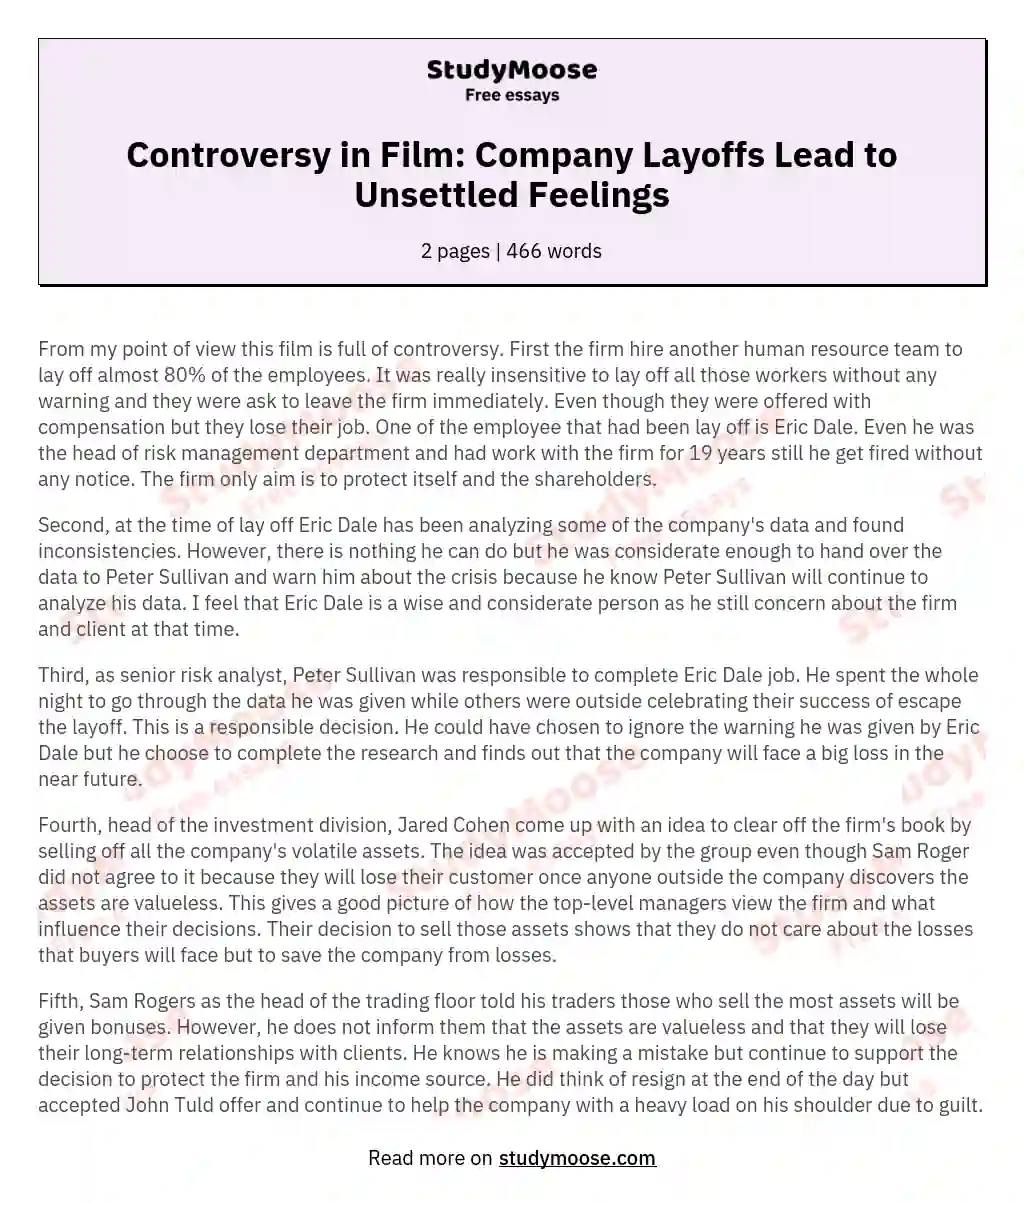 Controversy in Film: Company Layoffs Lead to Unsettled Feelings essay